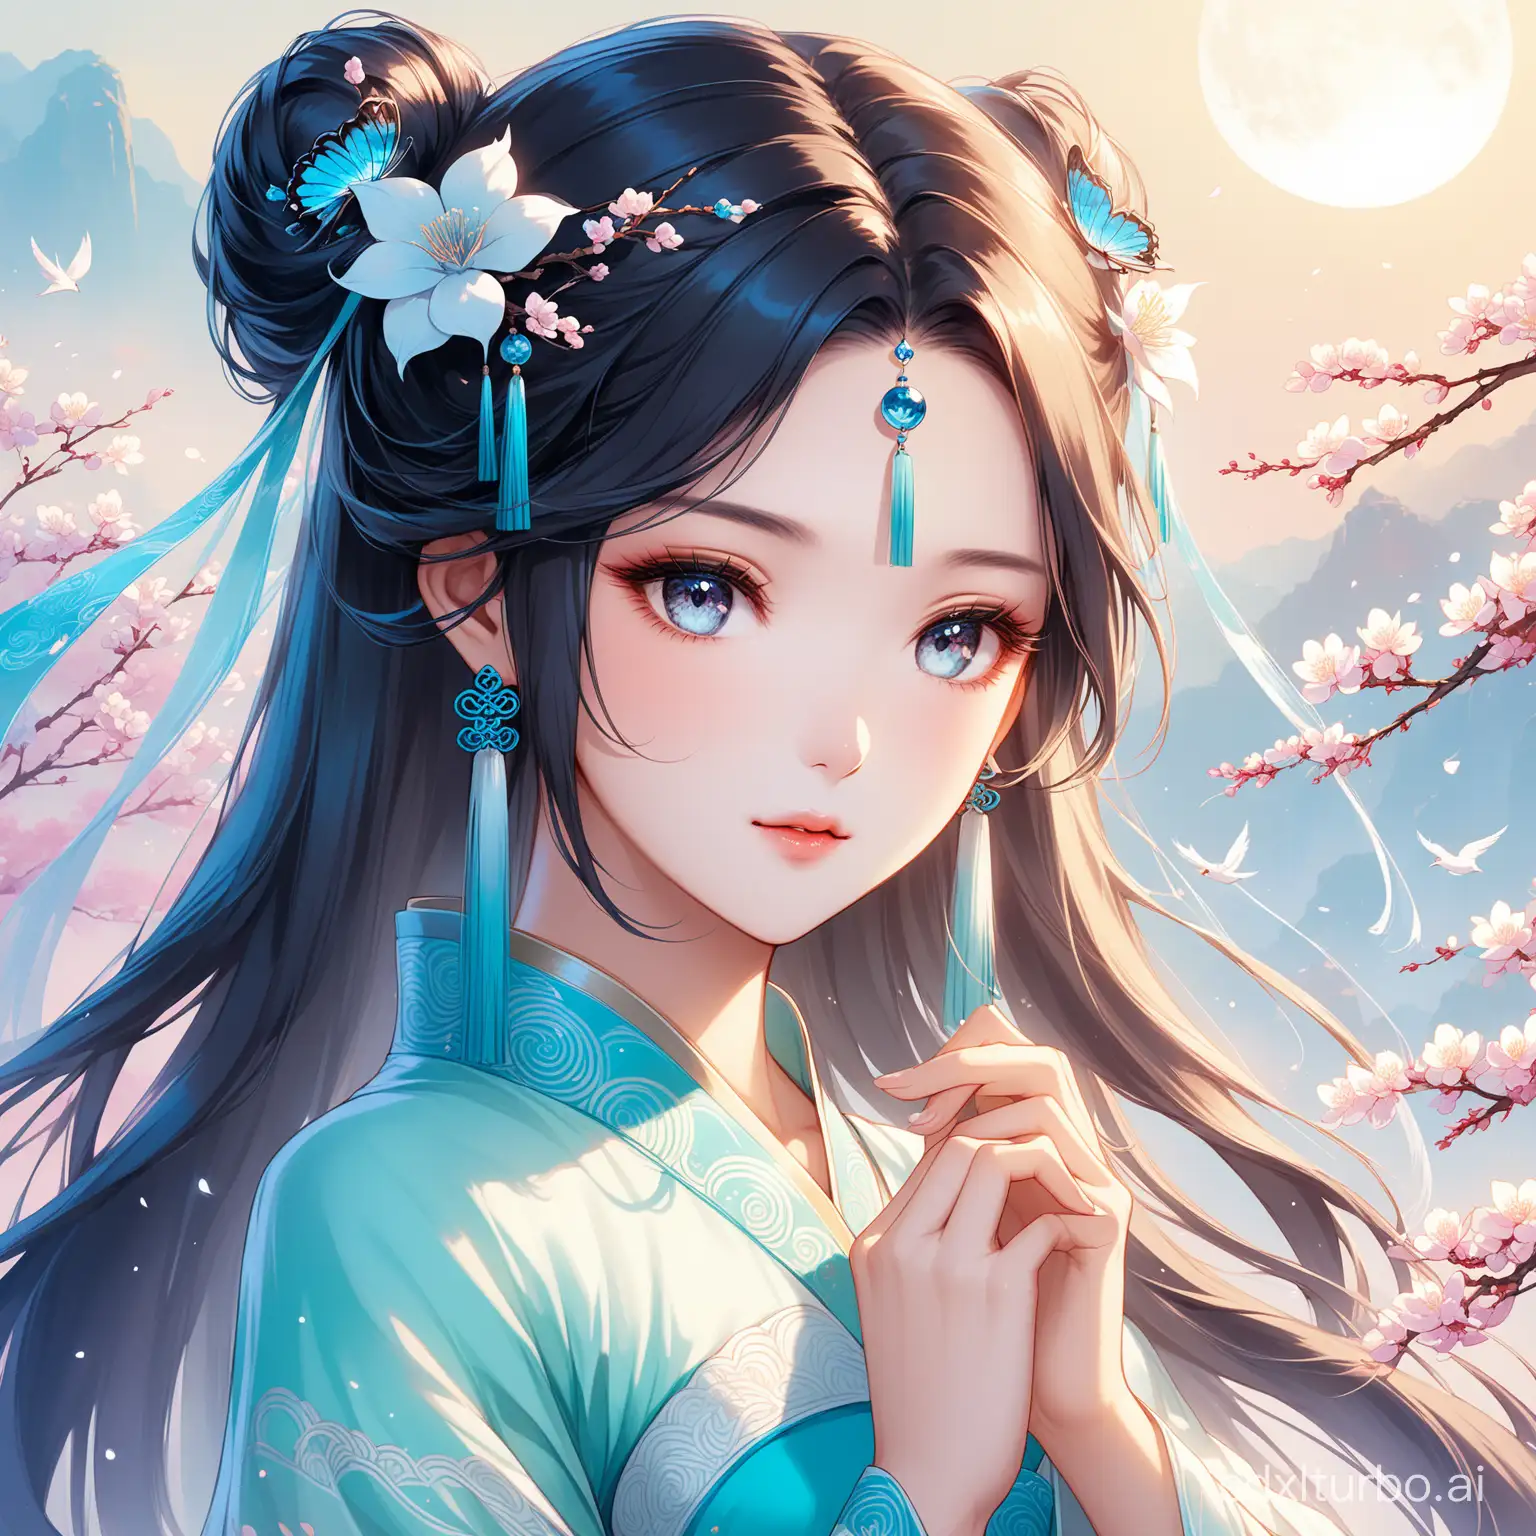 The cool and beautiful Chinese goddess with great love looks very ethereal.